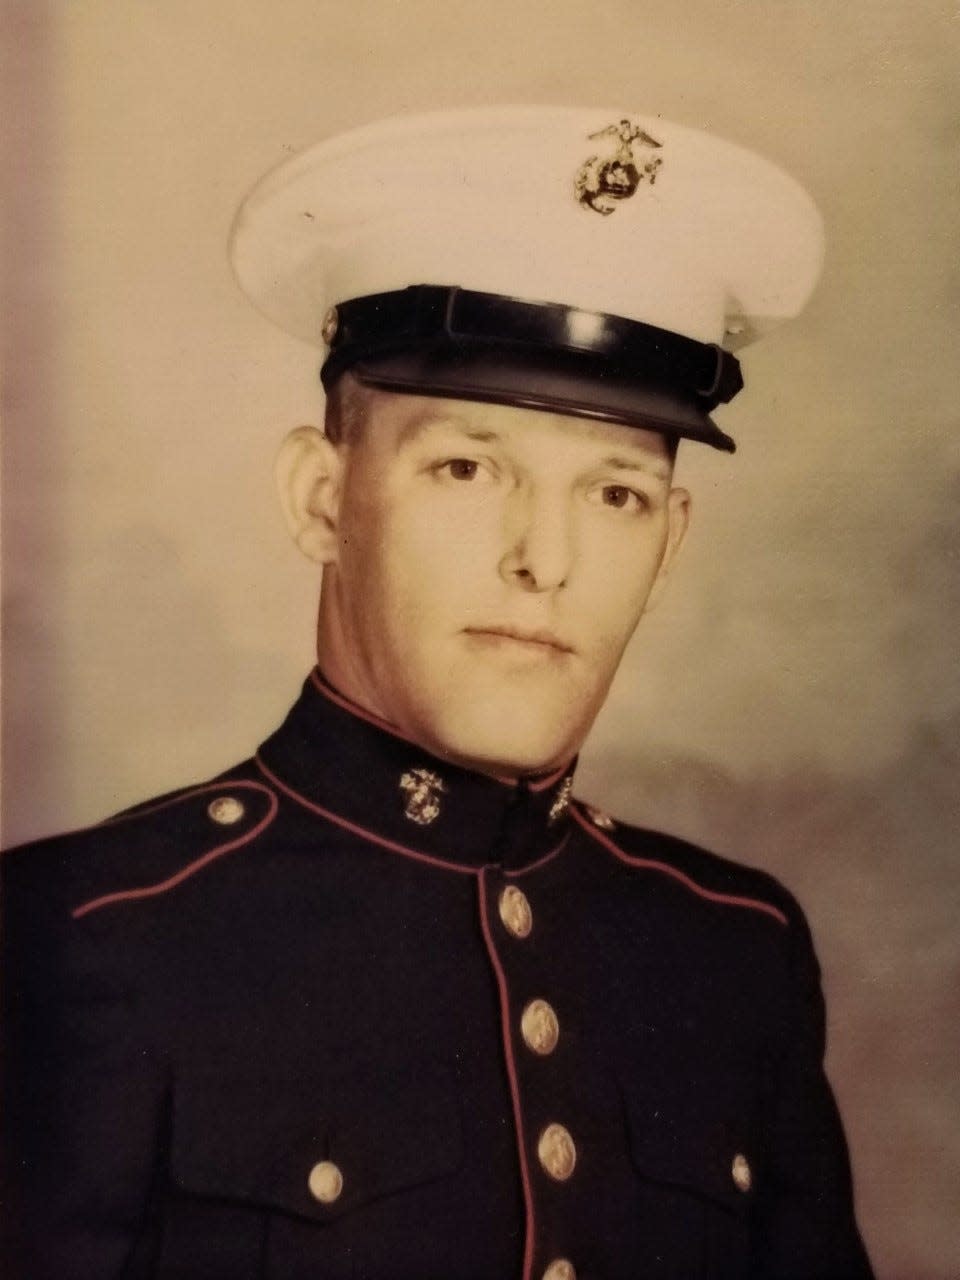 Donald Drake, then 21 of Newton, N.J., as a young Marine before leaving for Vietnam where he was killed on New Year's Eve 1966